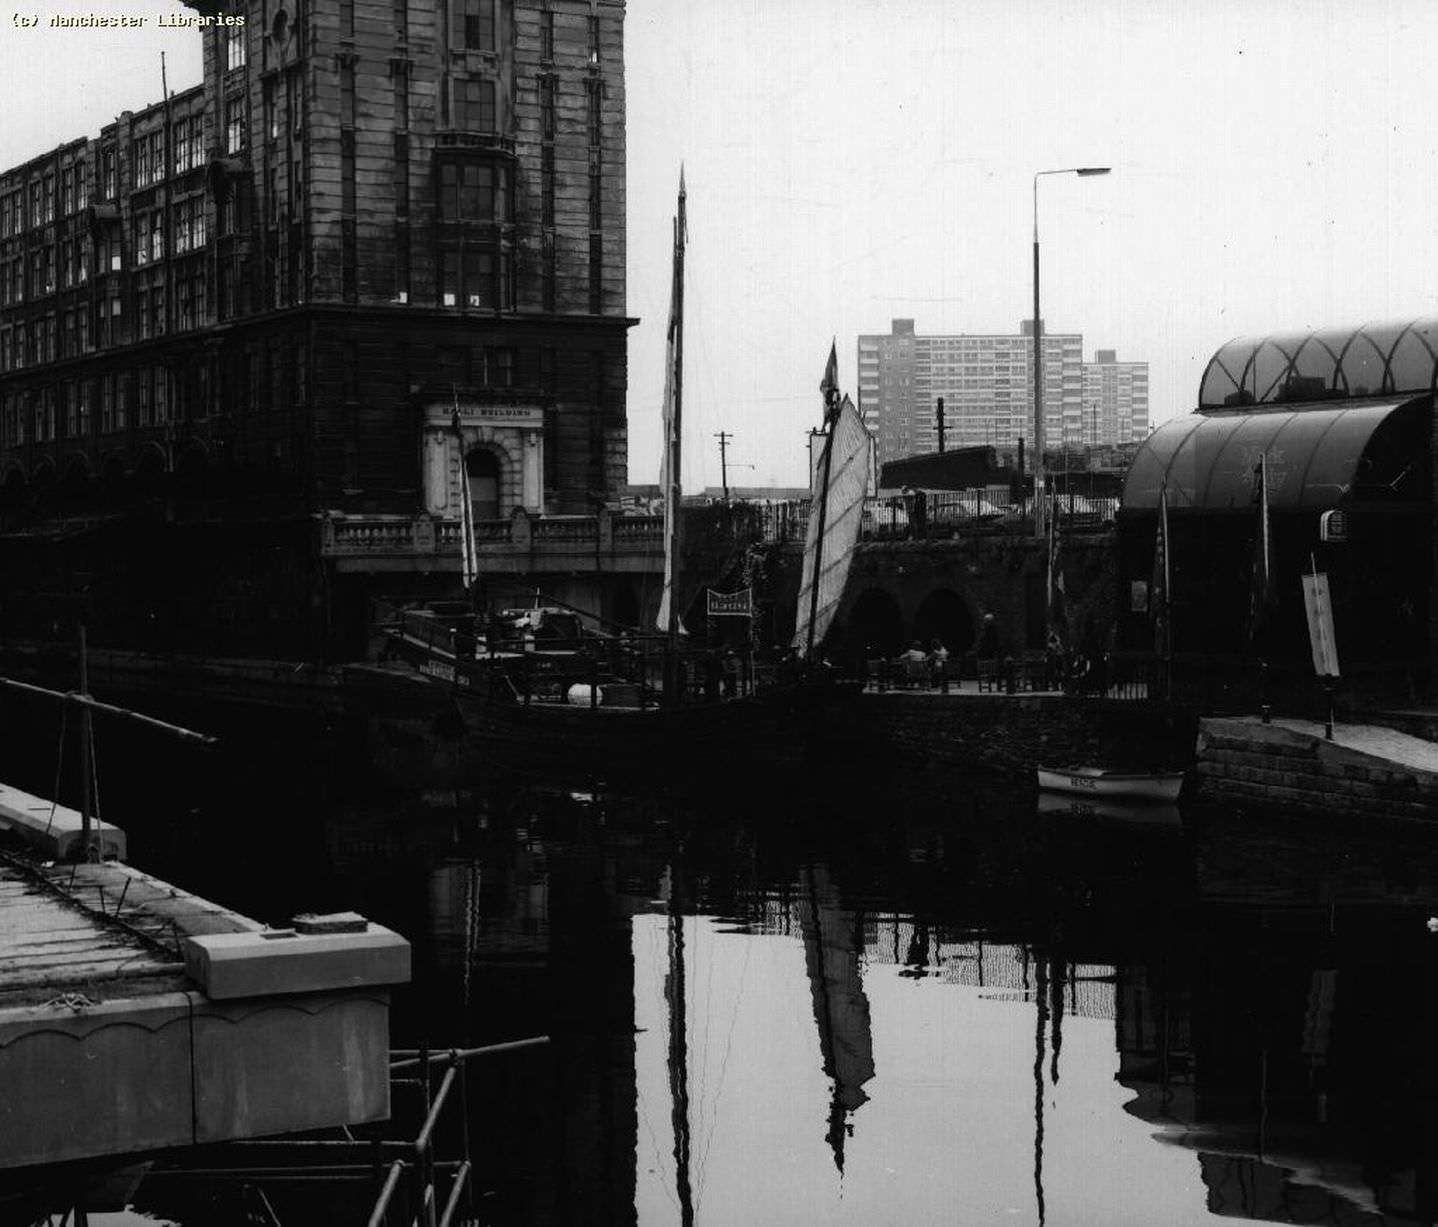 Chinese Junk on the River Irwell near the Mark Addy pub